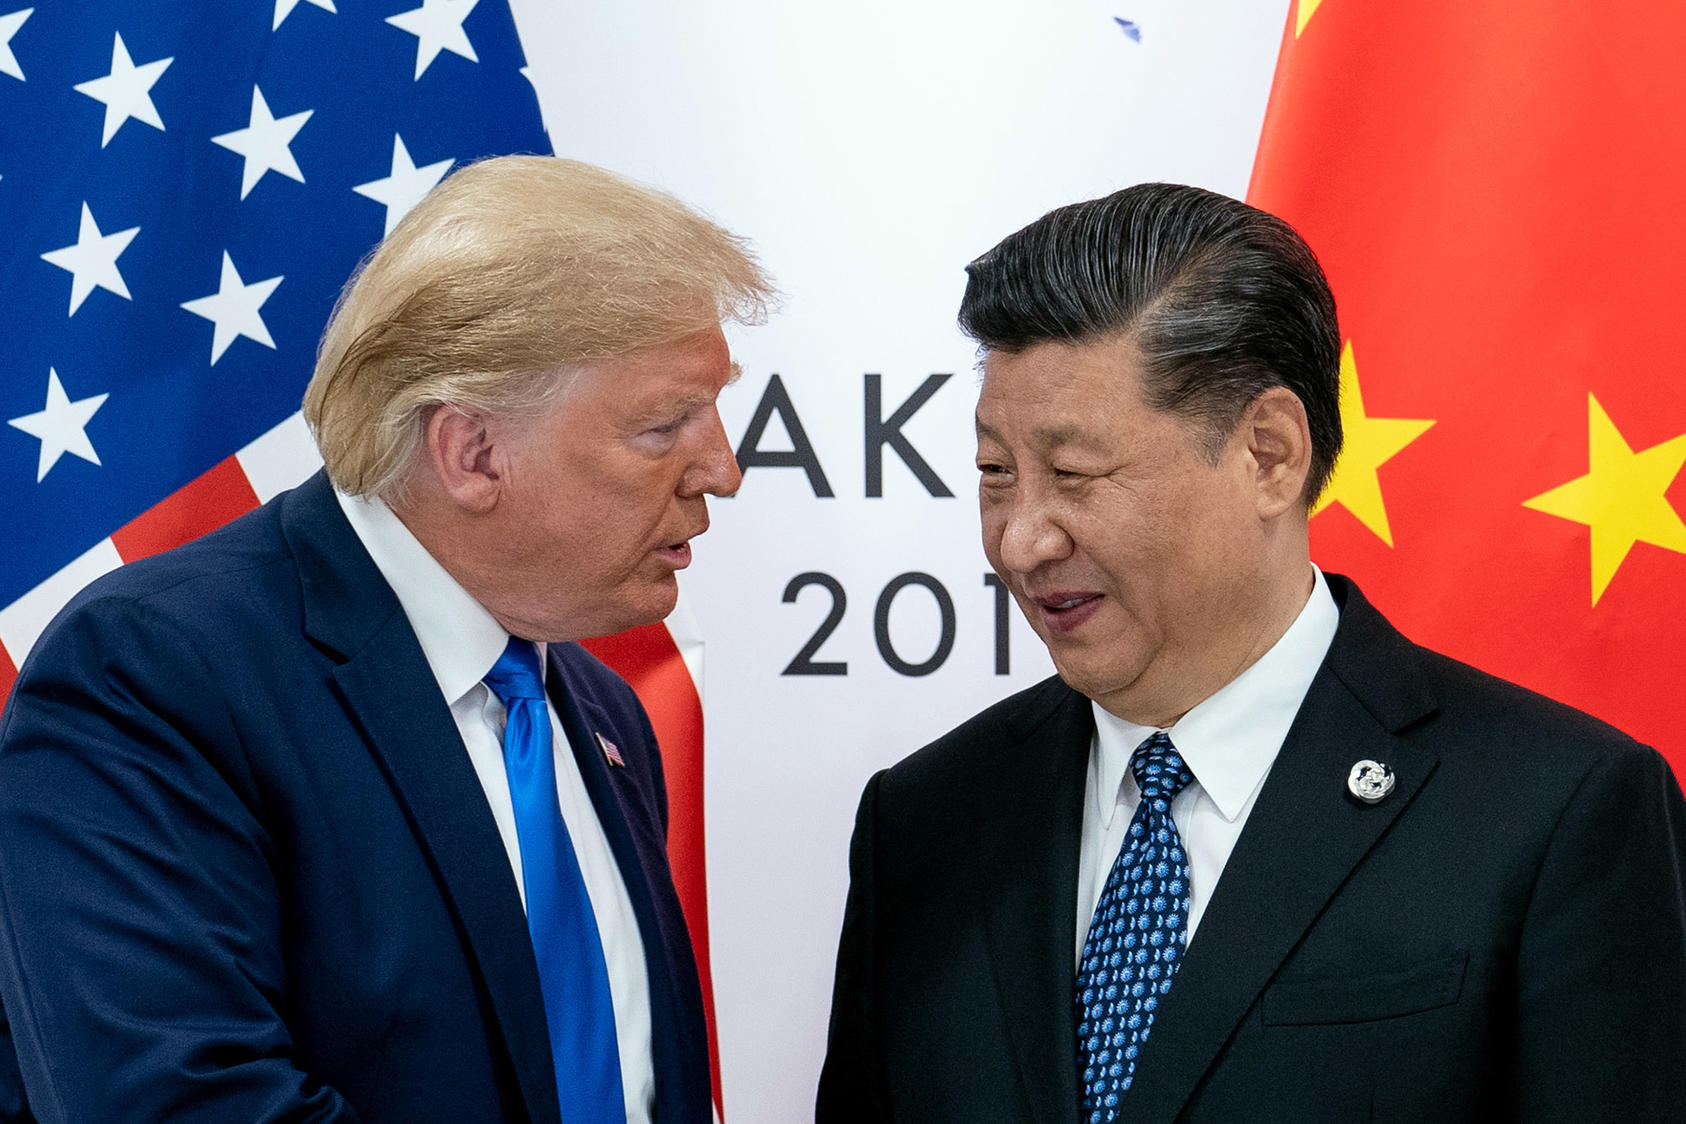 President Donald Trump speaks with President Xi Jinping of China at the G20 Summit in Osaka, Japan, June 29, 2019. (Erin Schaff/The New York Times)